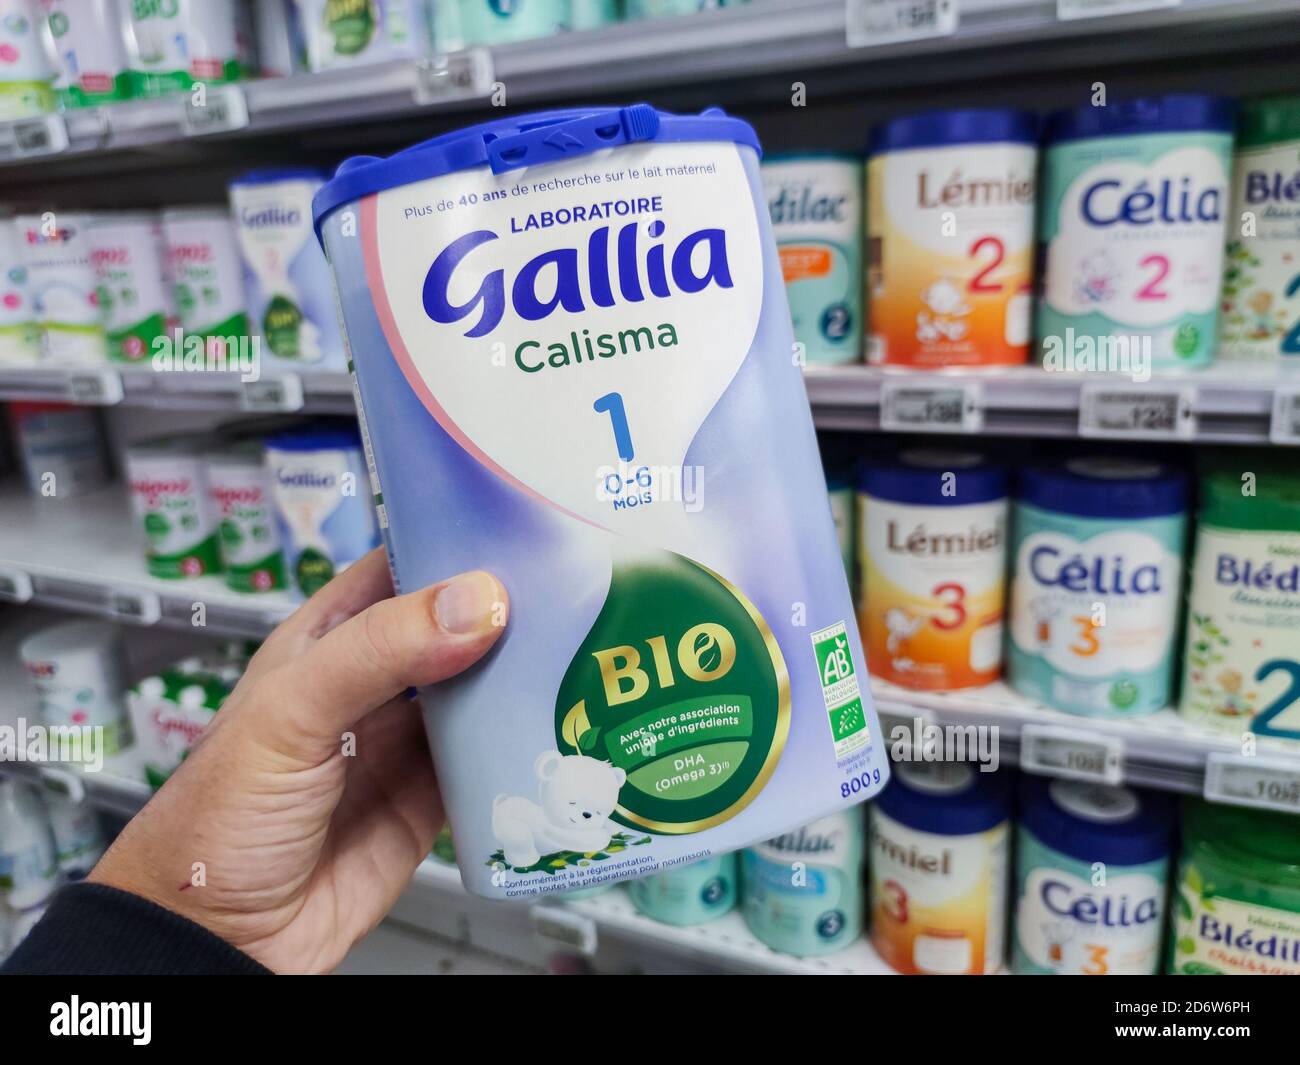 Puilboreau, France - October 14, 2020:A consumer chooses a box of Gallia  brand baby milk from the baby food section of a supermarket Stock Photo -  Alamy